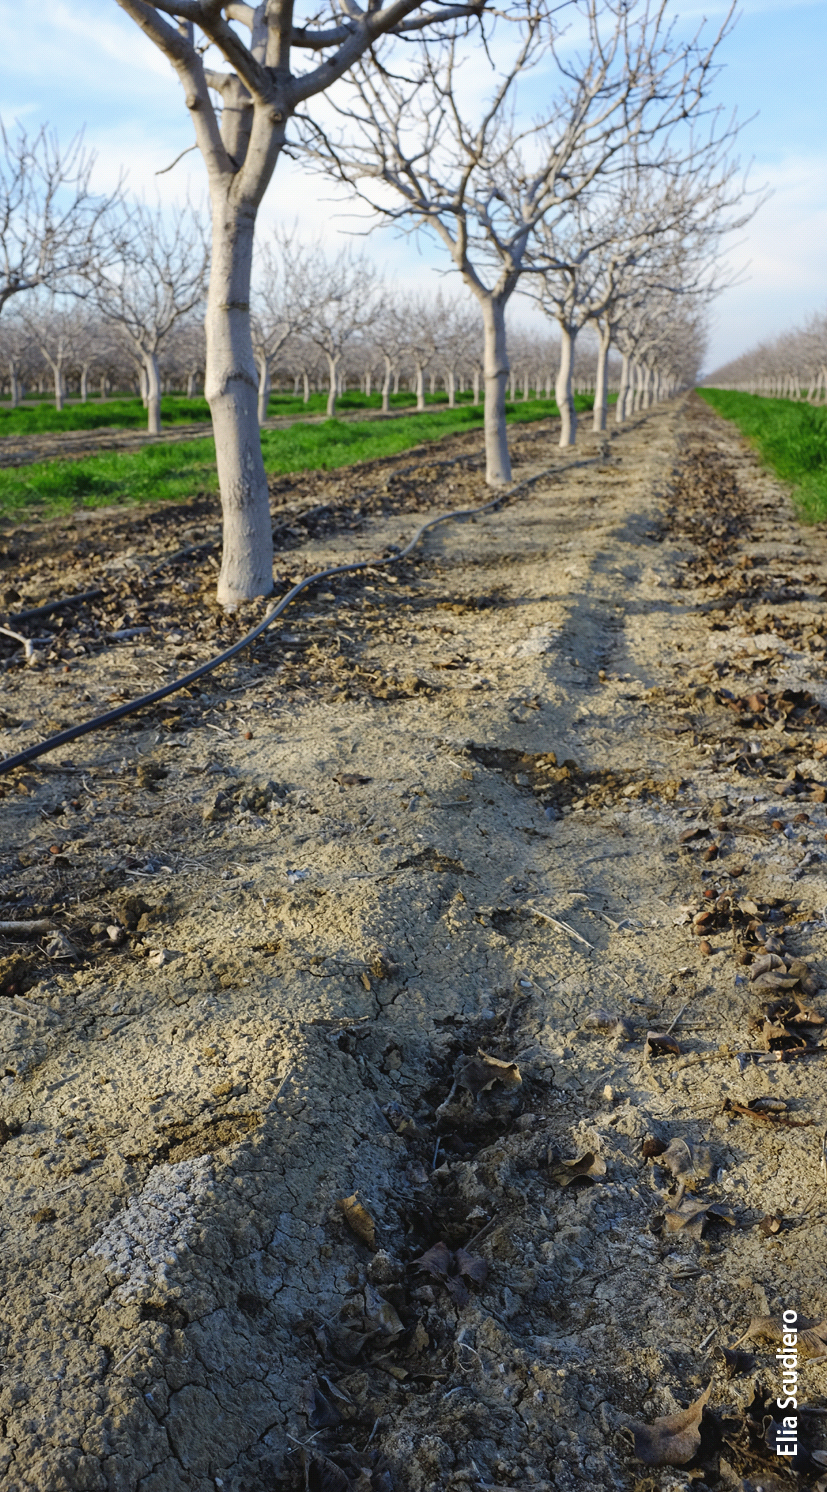 A saline-sodic pistachio orchard near Lemoore showing salt crust present in early winter. Remote-sensing predictions of root zone salinity showed excellent correspondence with the presence of salt crusts.